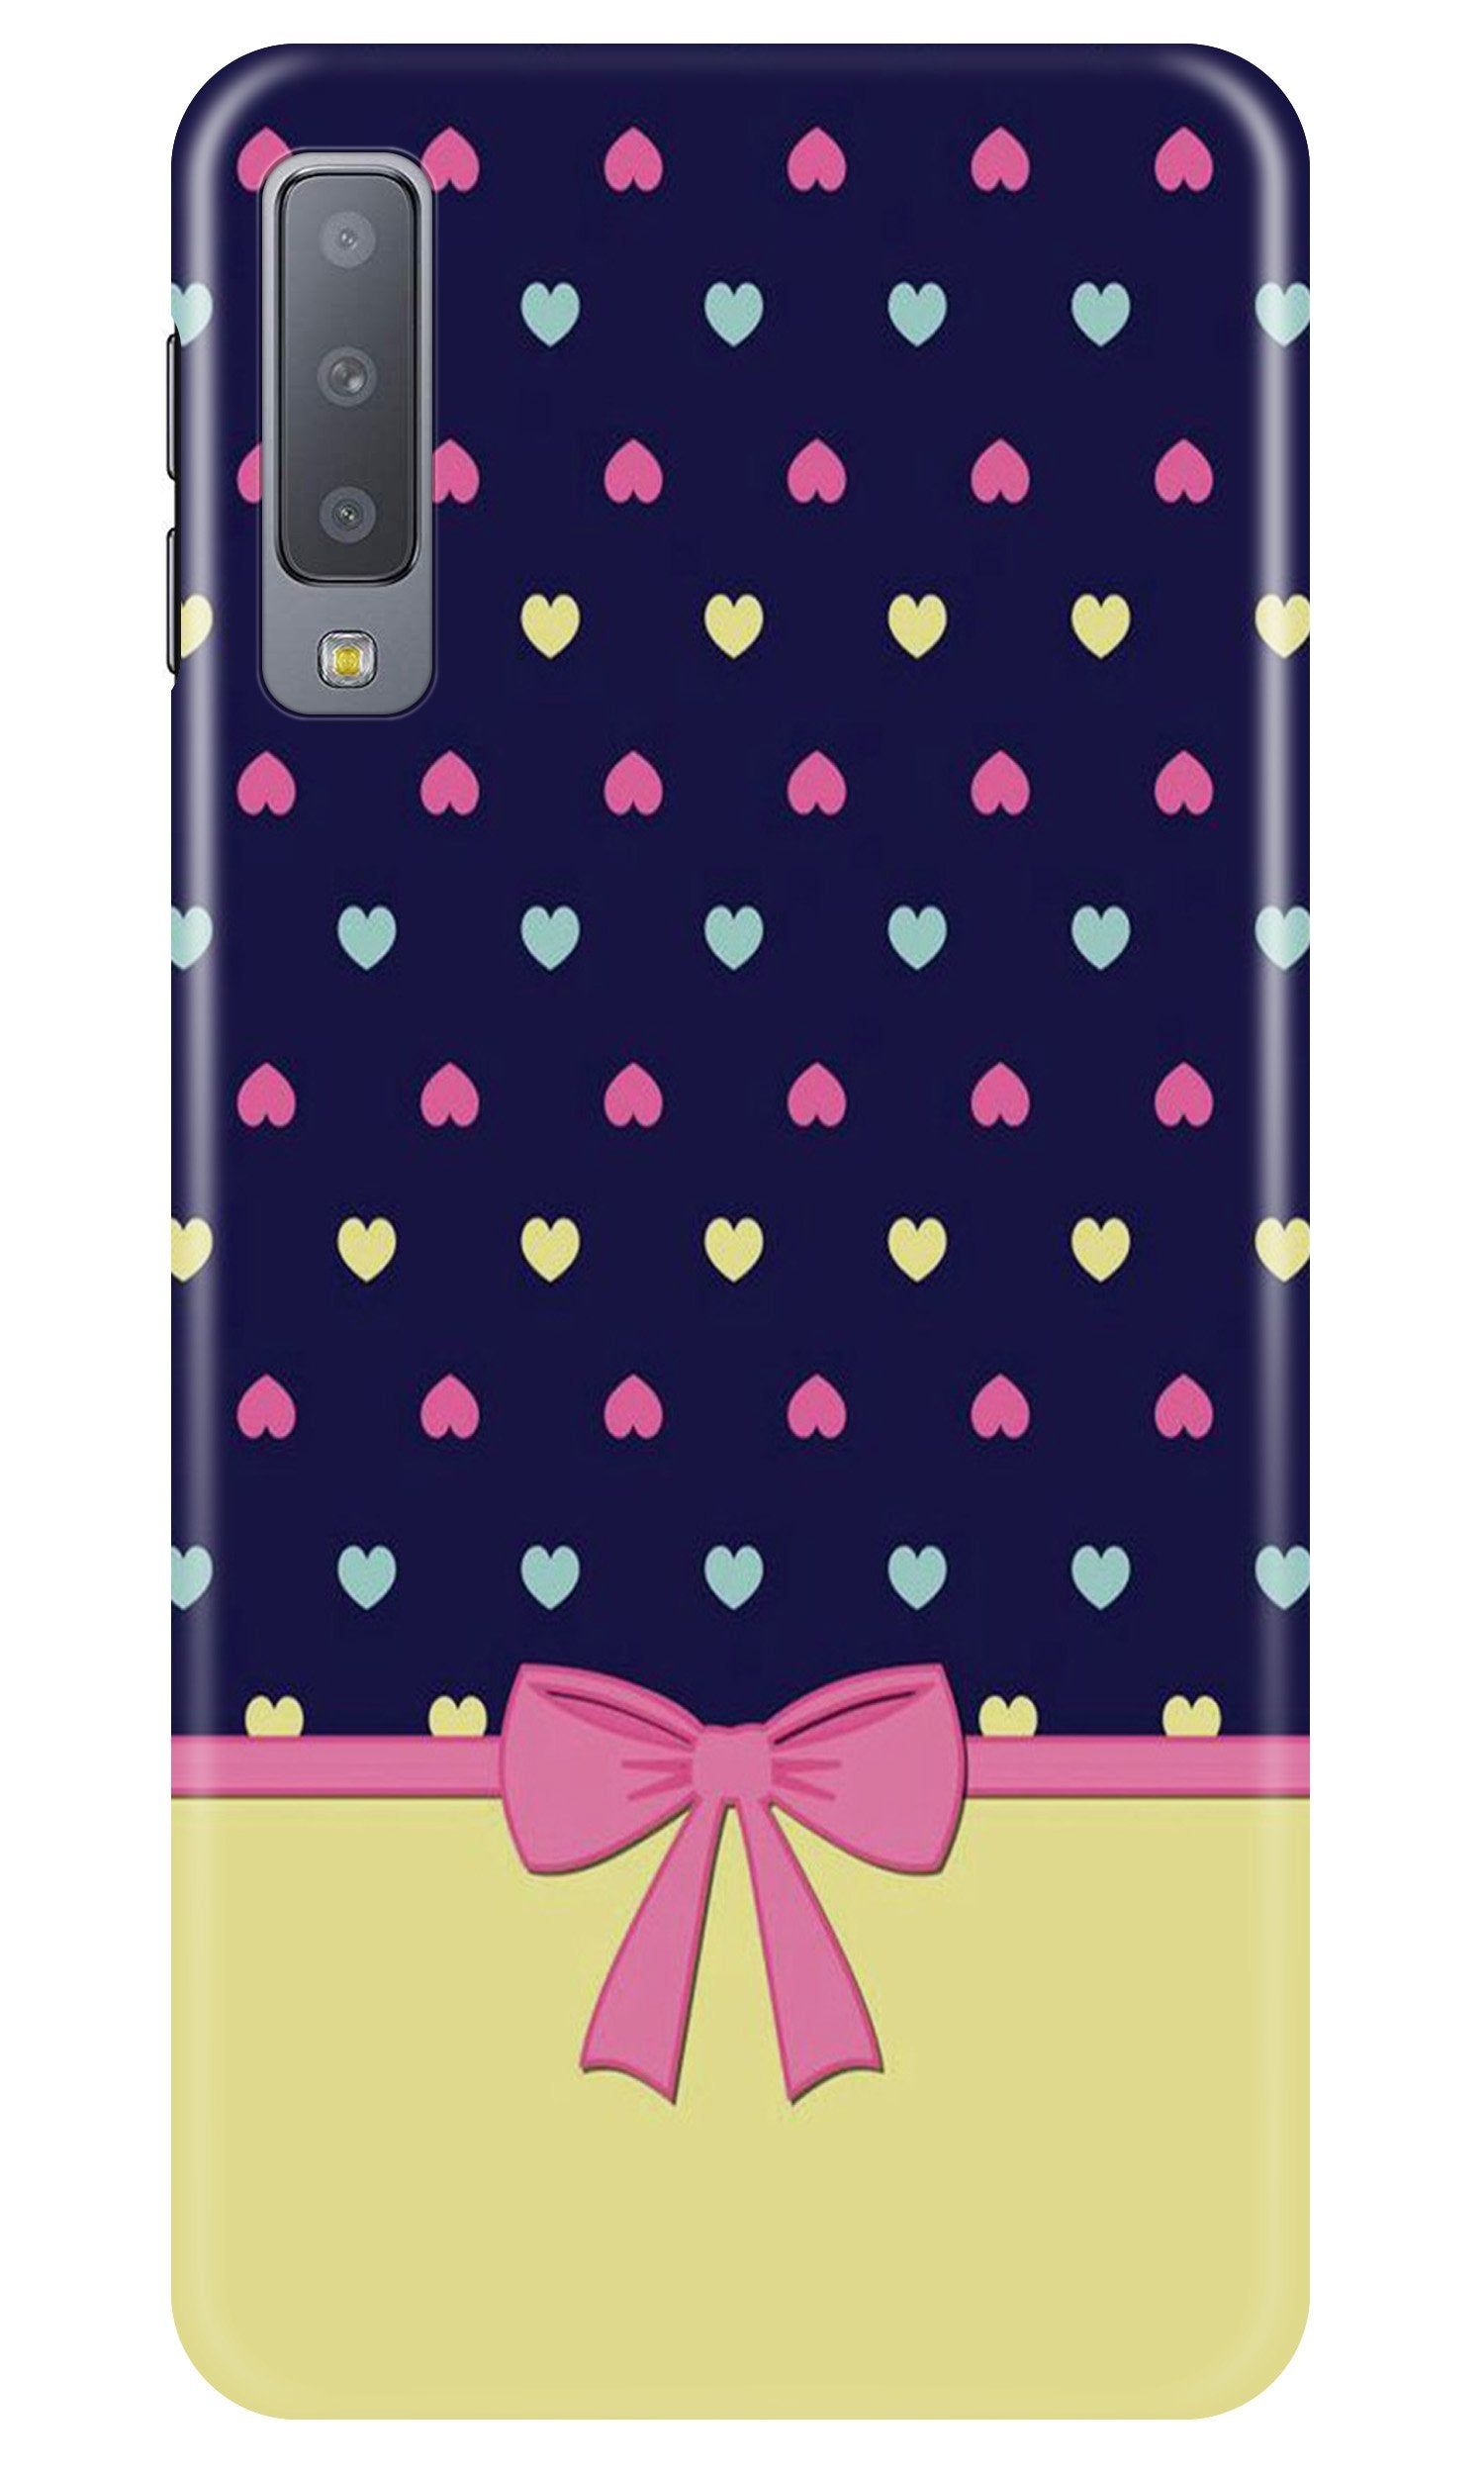 Gift Wrap5 Case for Galaxy A7 (2018)